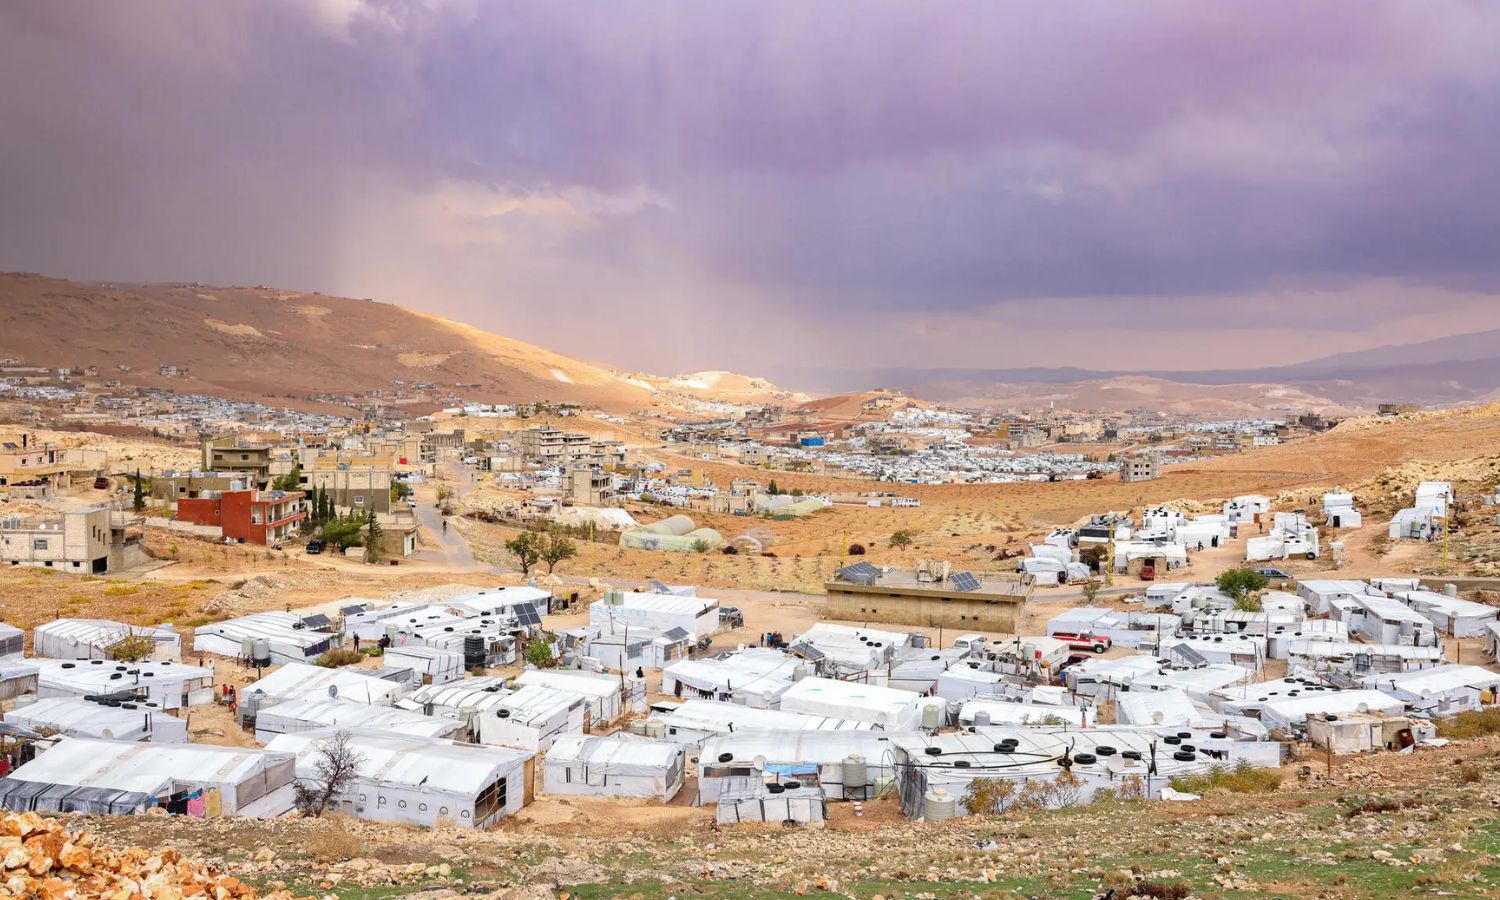 Aerial photo of a Syrian refugee camp in the border Arsal town, Lebanon - November 2022 (Doctors Without Borders)